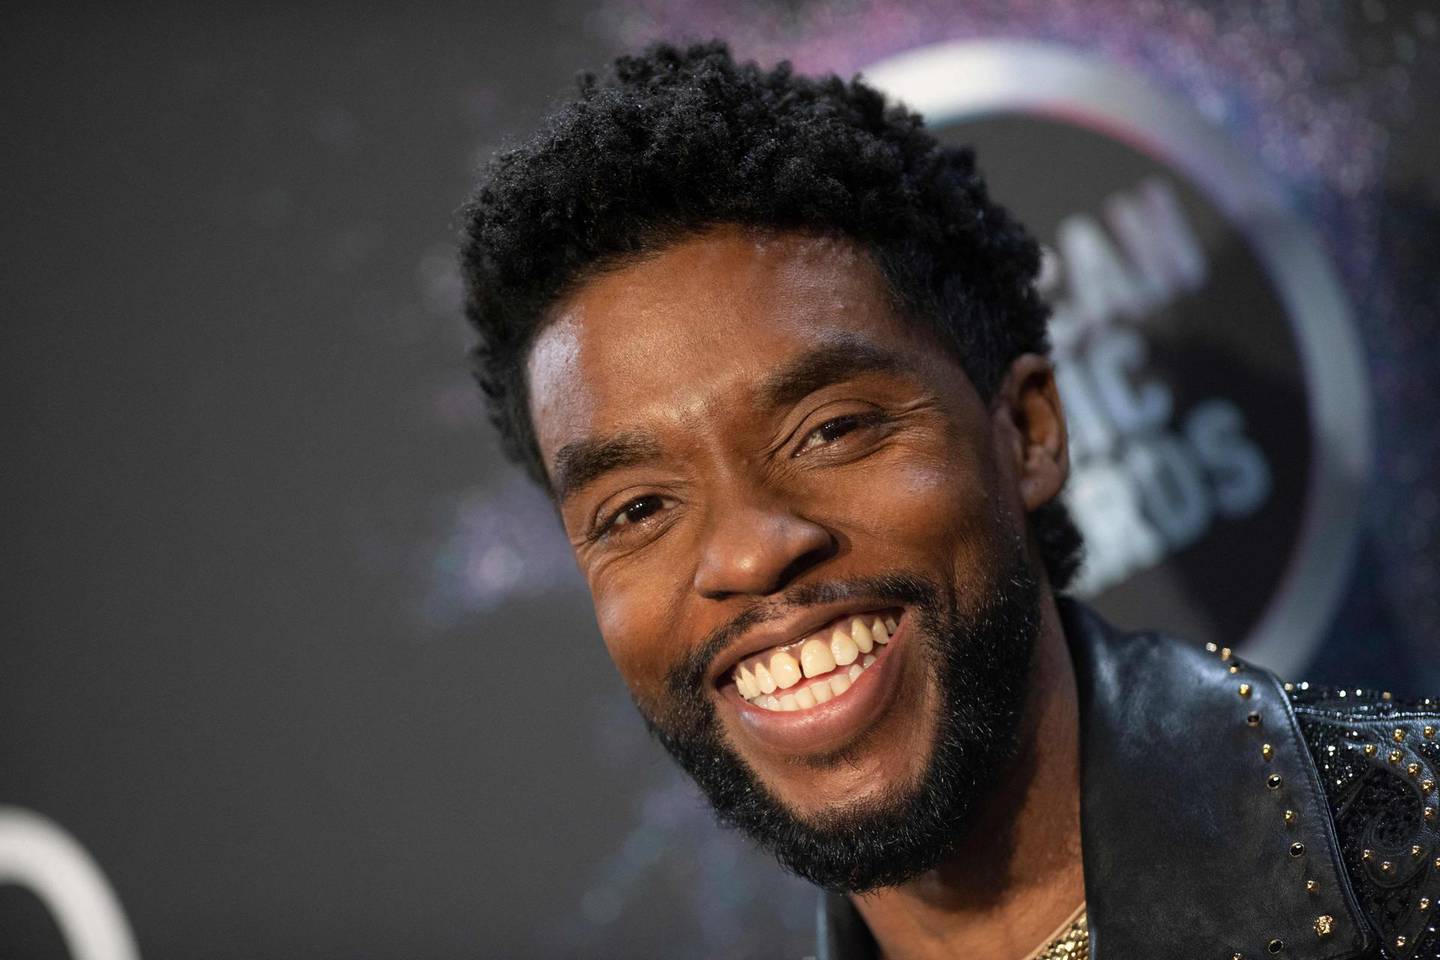 (FILES) In this file photo taken on November 24, 2019 US actor Chadwick Boseman poses in the press room during the 2019 American Music Awards at the Microsoft theatre in Los Angeles. Chadwick Boseman, who died of cancer last August, was posthumously voted best actor for 1920s blues drama "Ma Rainey's Black Bottom" by Hollywood's actors guild during the virtual SAG awards on April 4, 2021. / AFP / Valerie MACON
